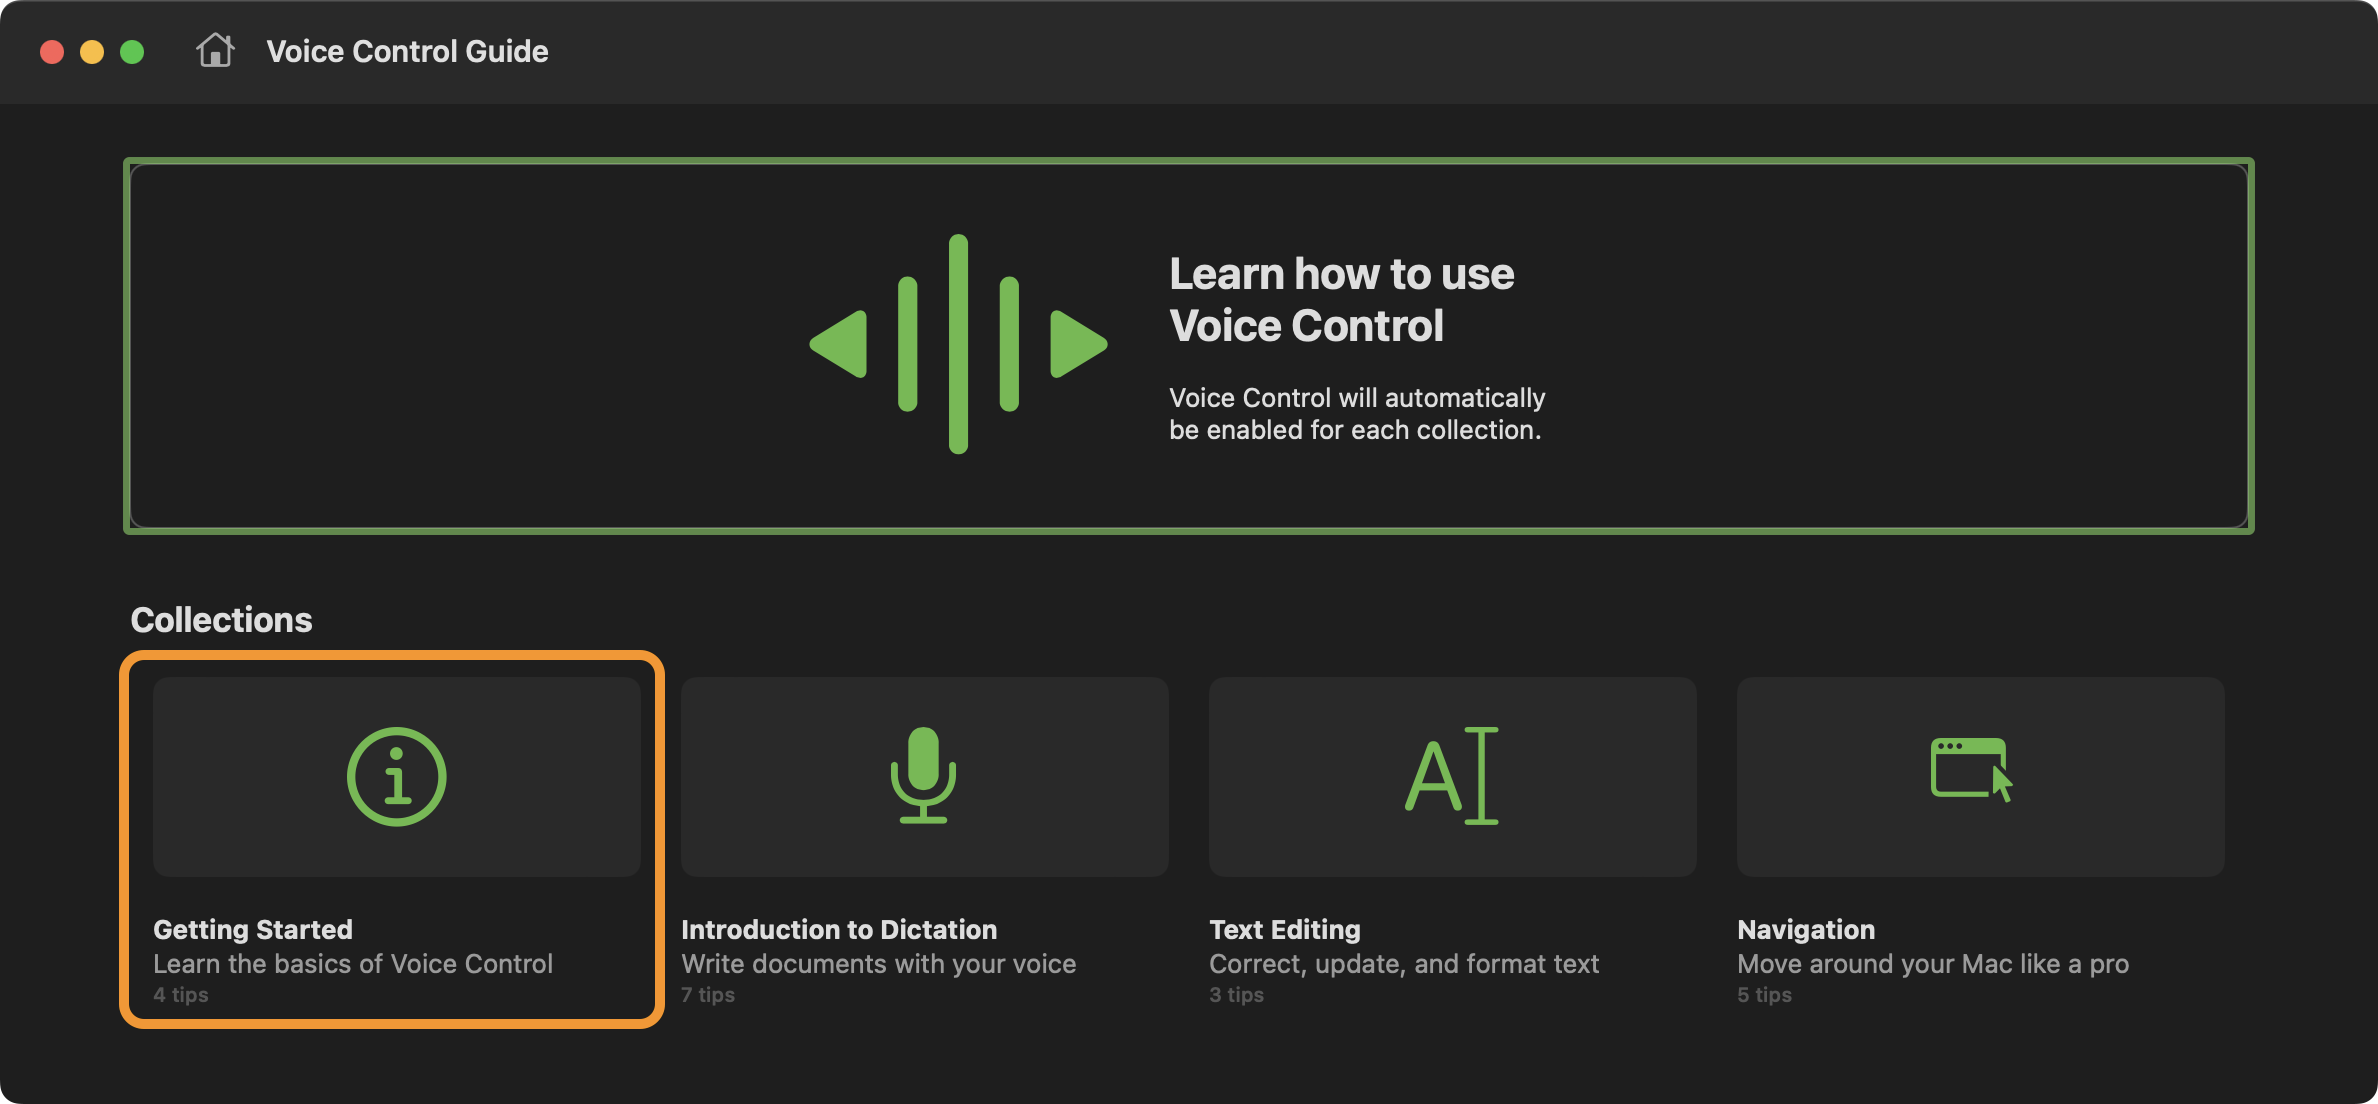 Voice Control Guide Interface